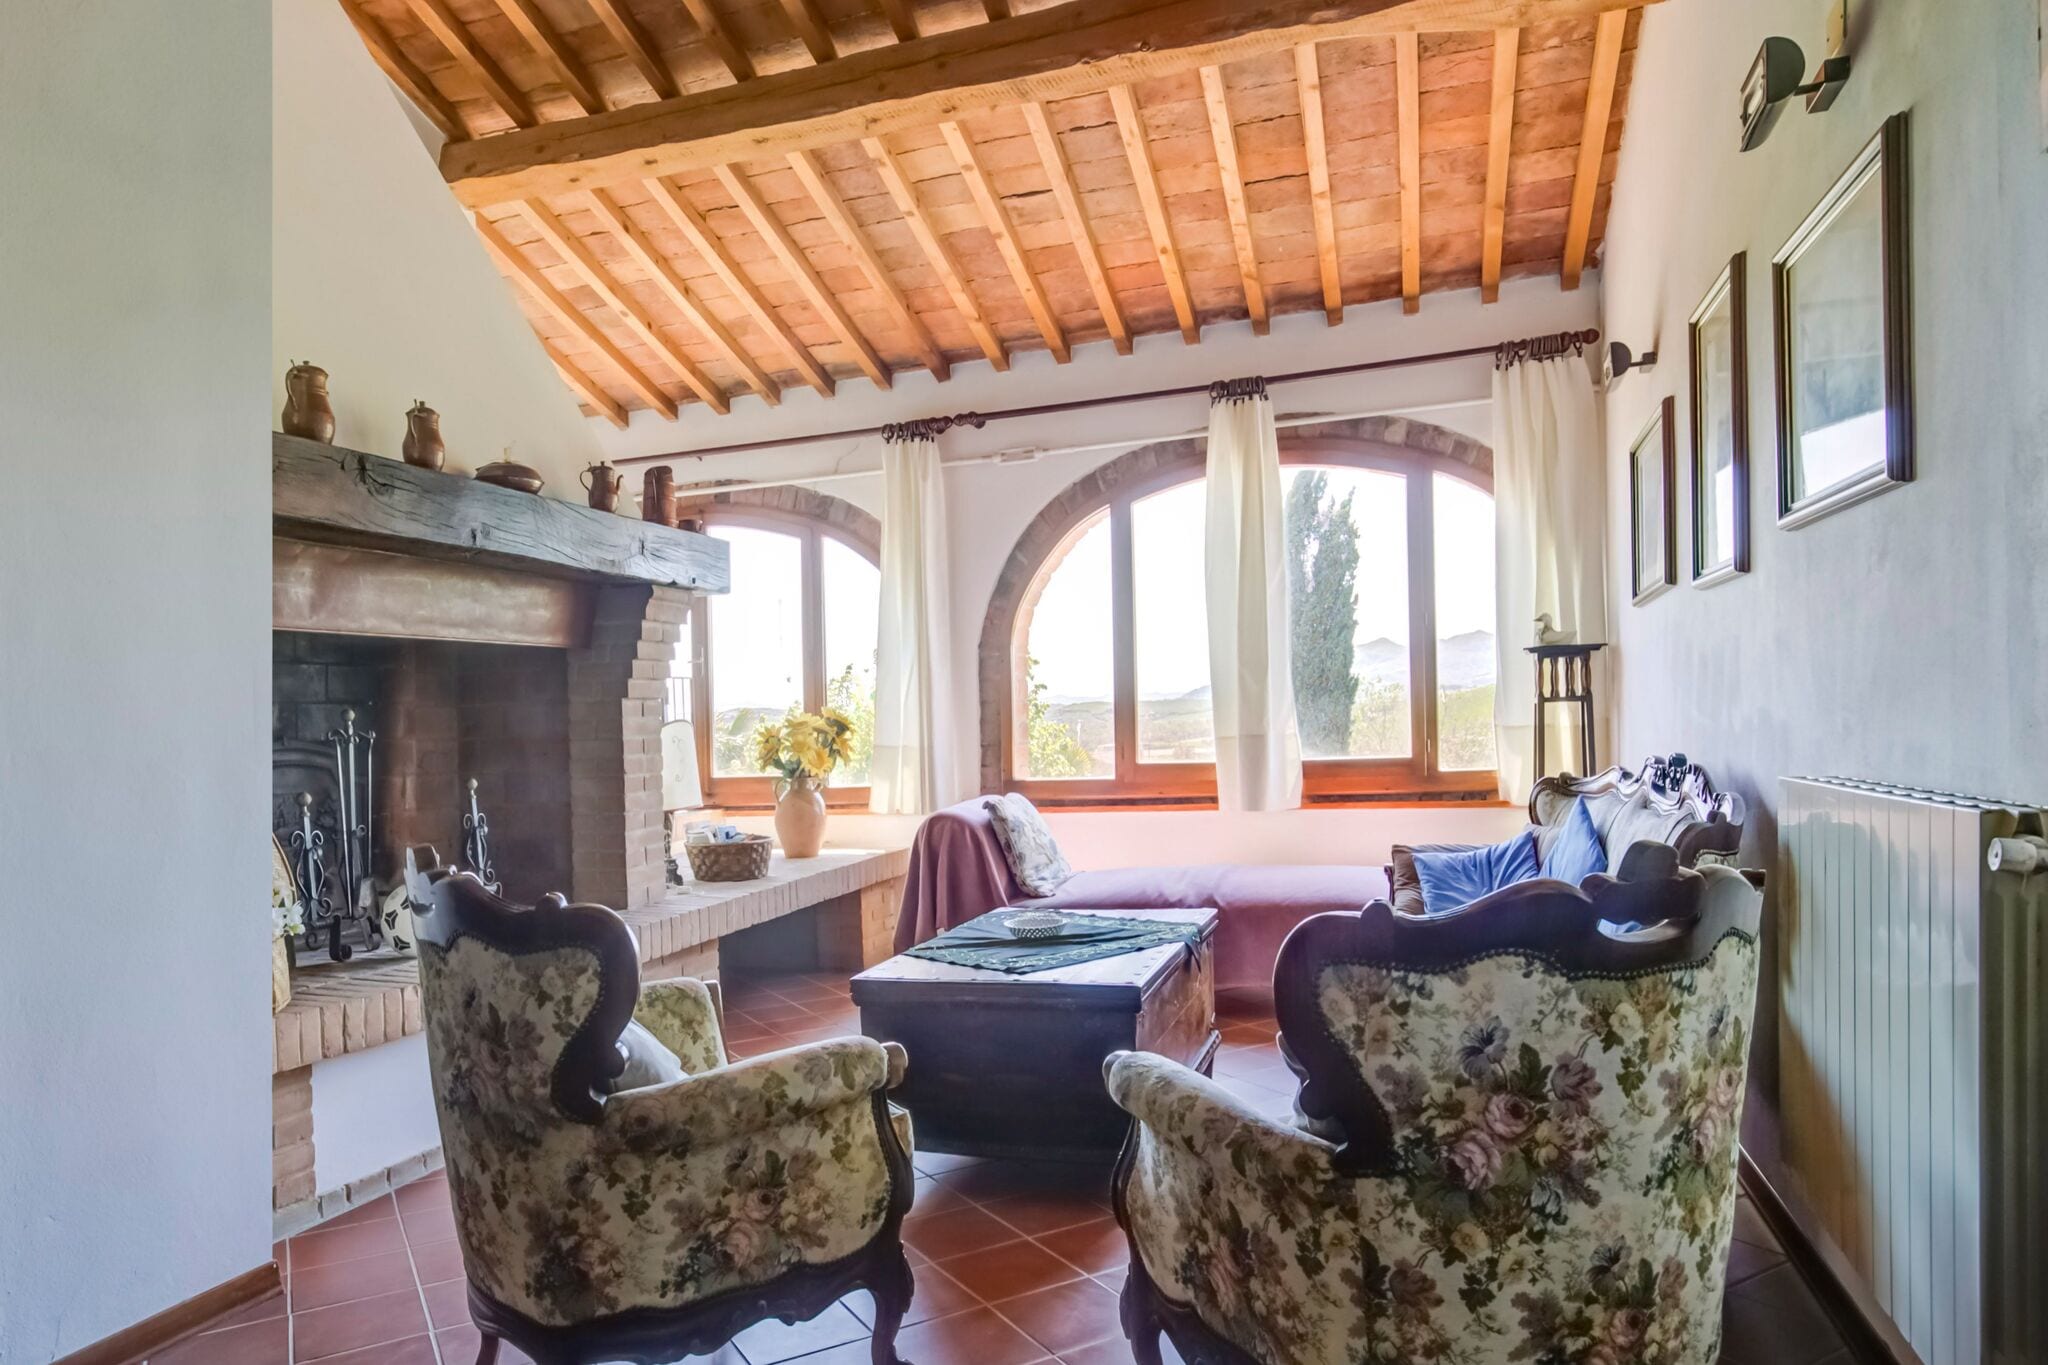 Apartment in a typical Tuscan farmhouse with swimming pool